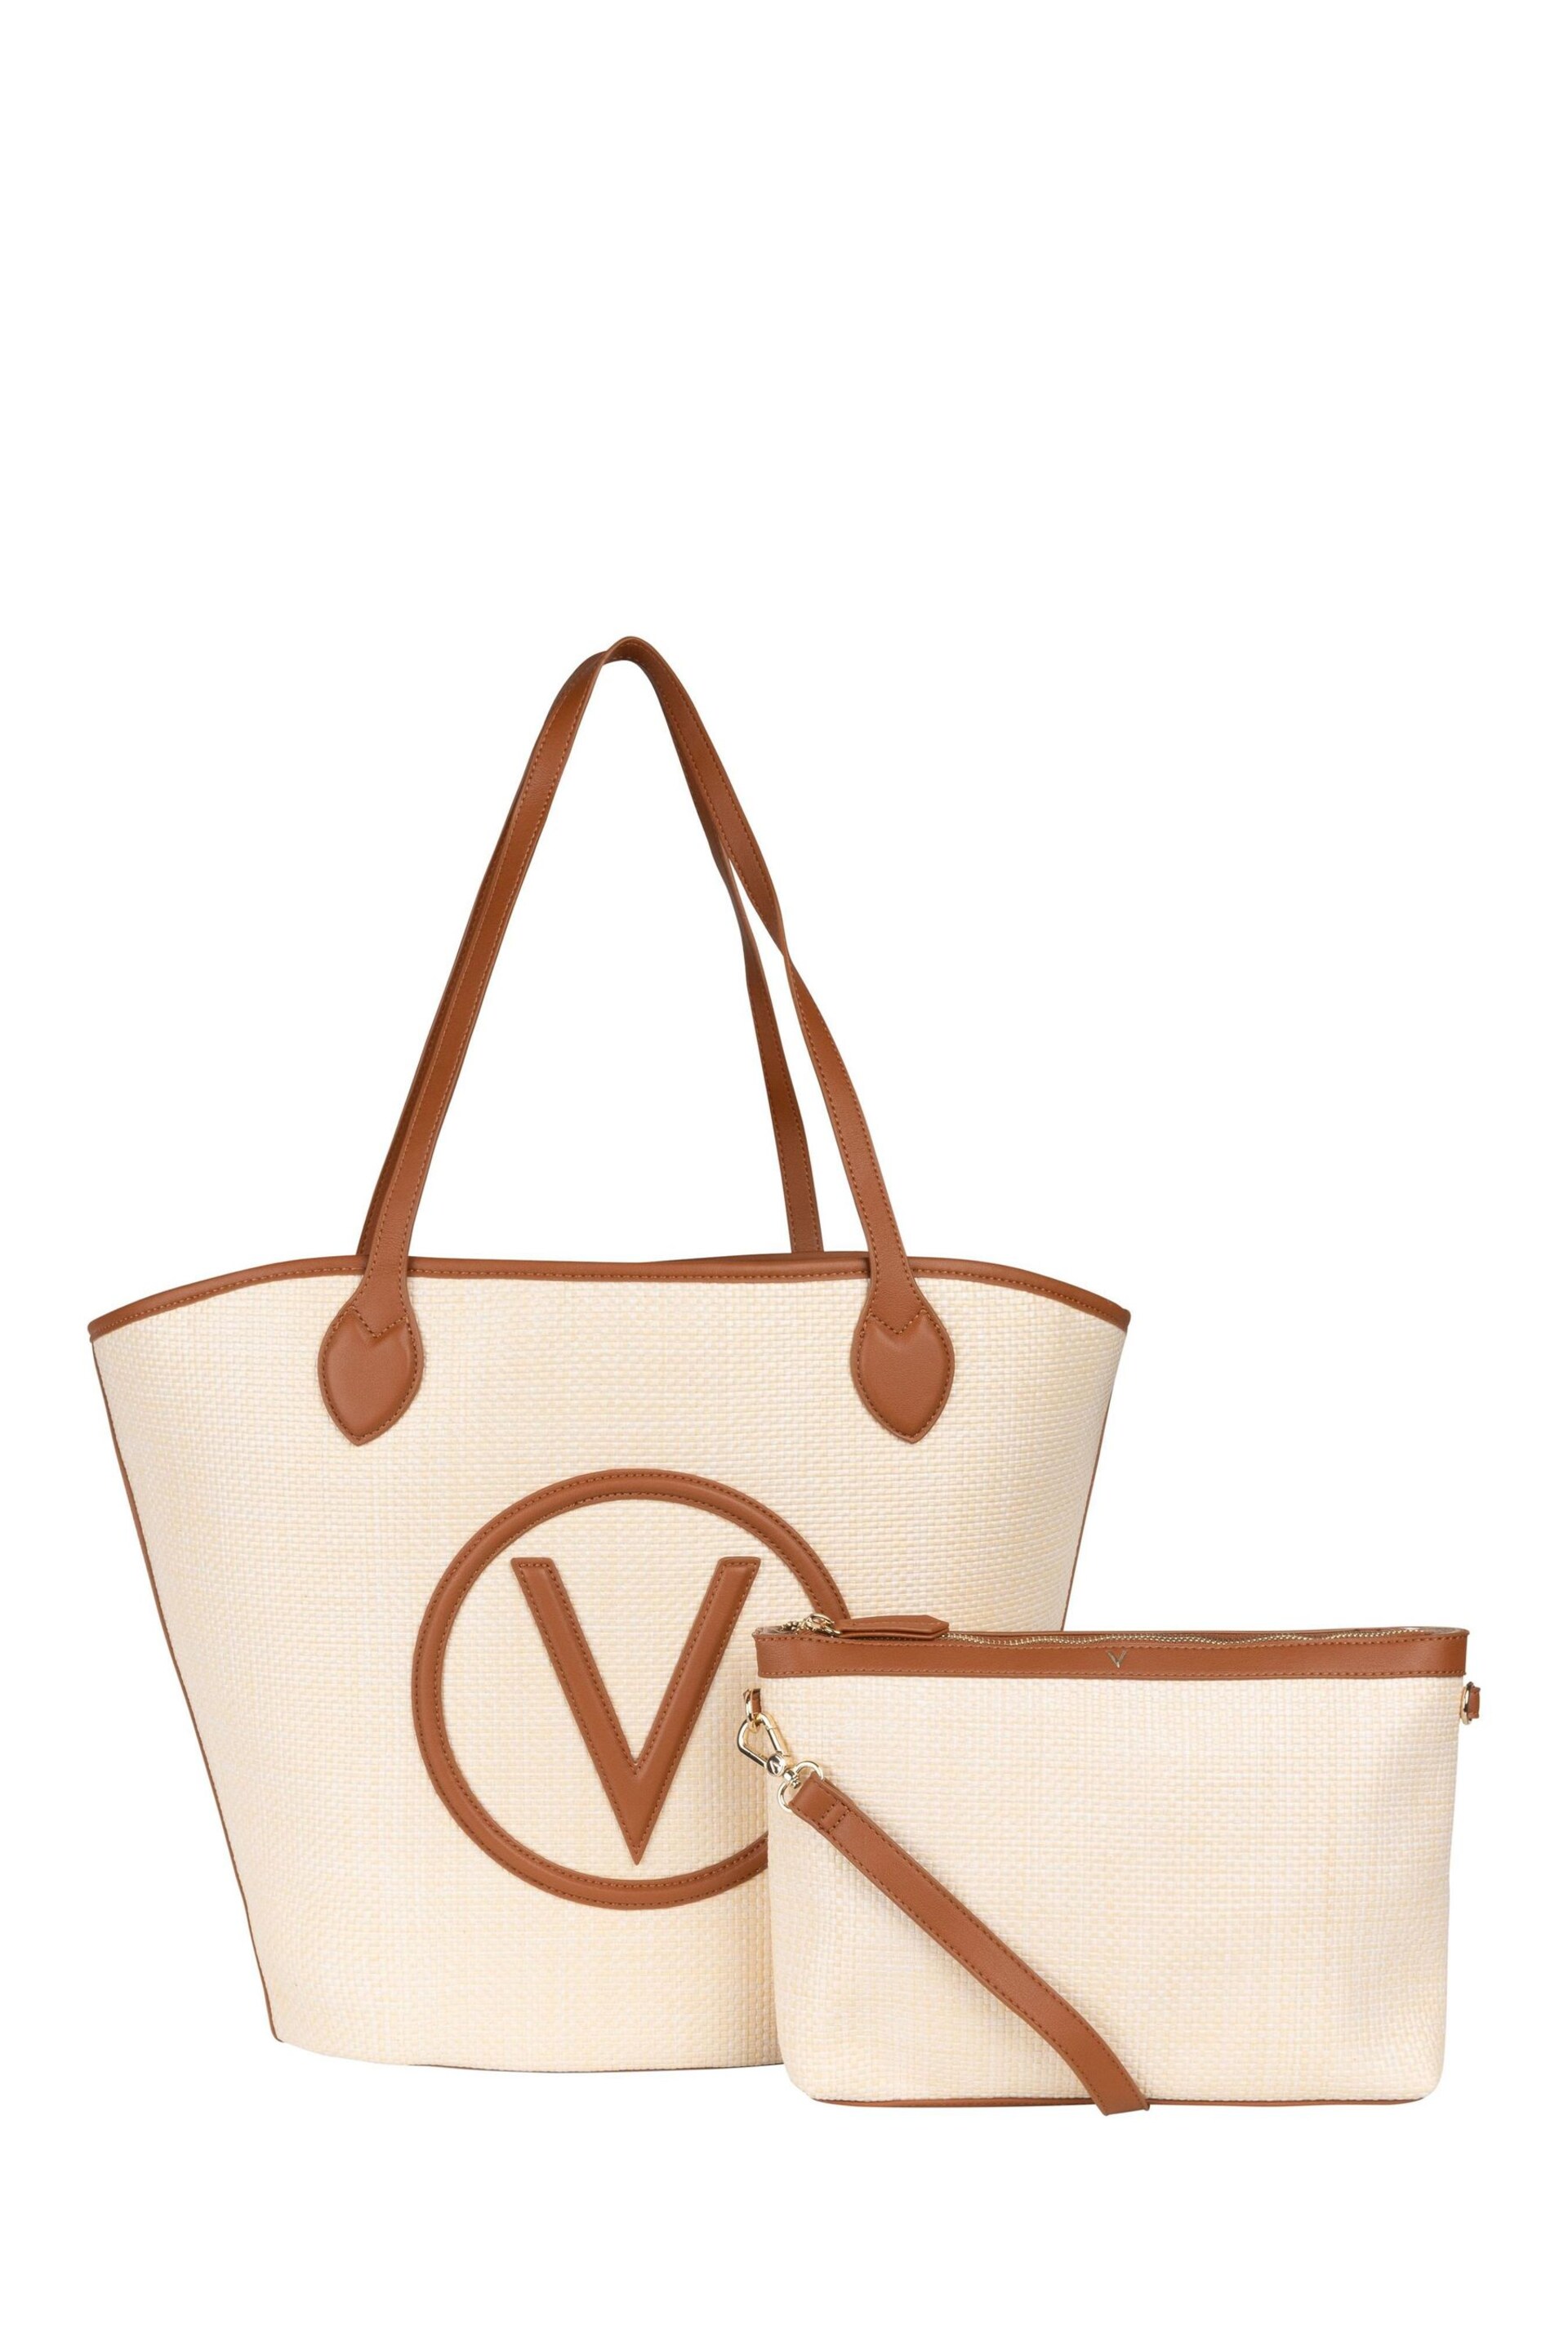 Valentino Bags Brown Covent Canvas Tote Bag With Removable Crossbody Bag - Image 5 of 5